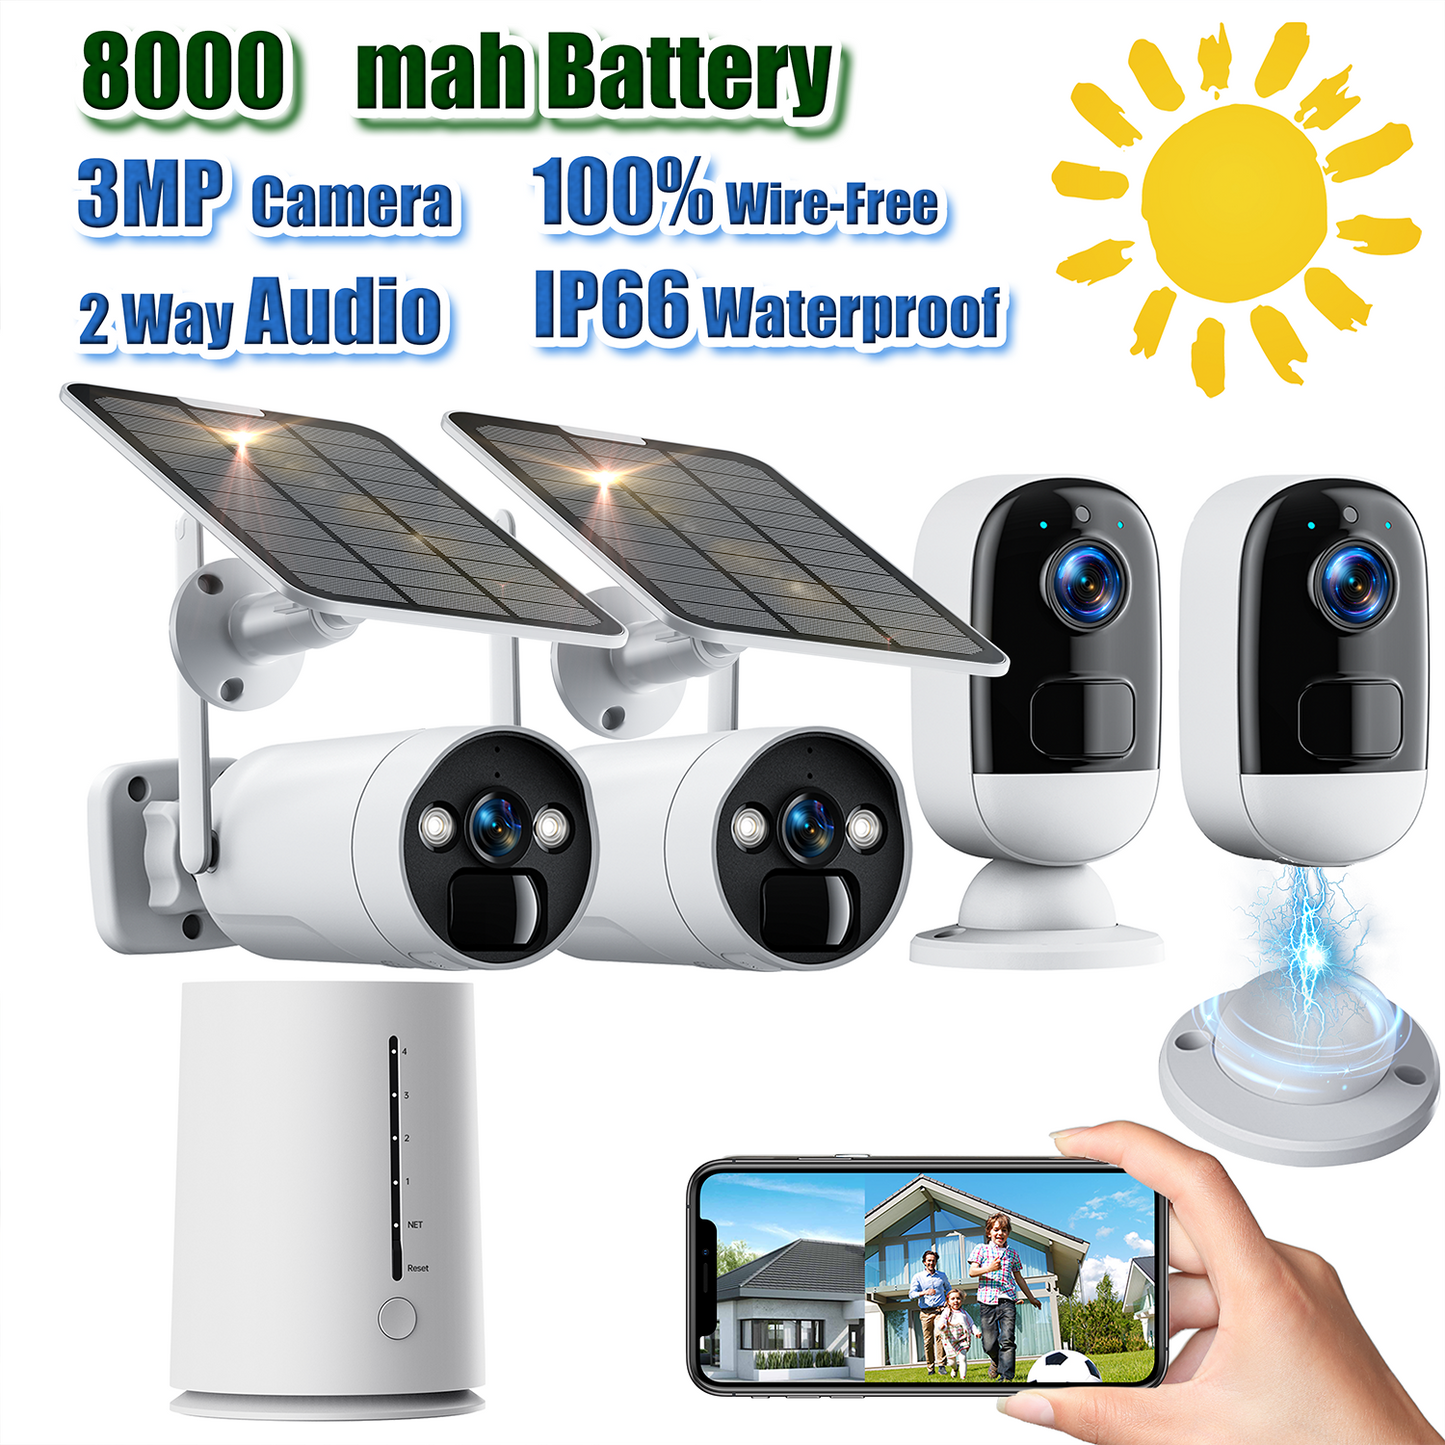 Toguard 3MP Solar Wireless Security Camera System Rechargeable Battery Security Camera Wireless Wifi Outdoor Indoor (Includes Base Station & 4 Camera & 2 Solar Panel)